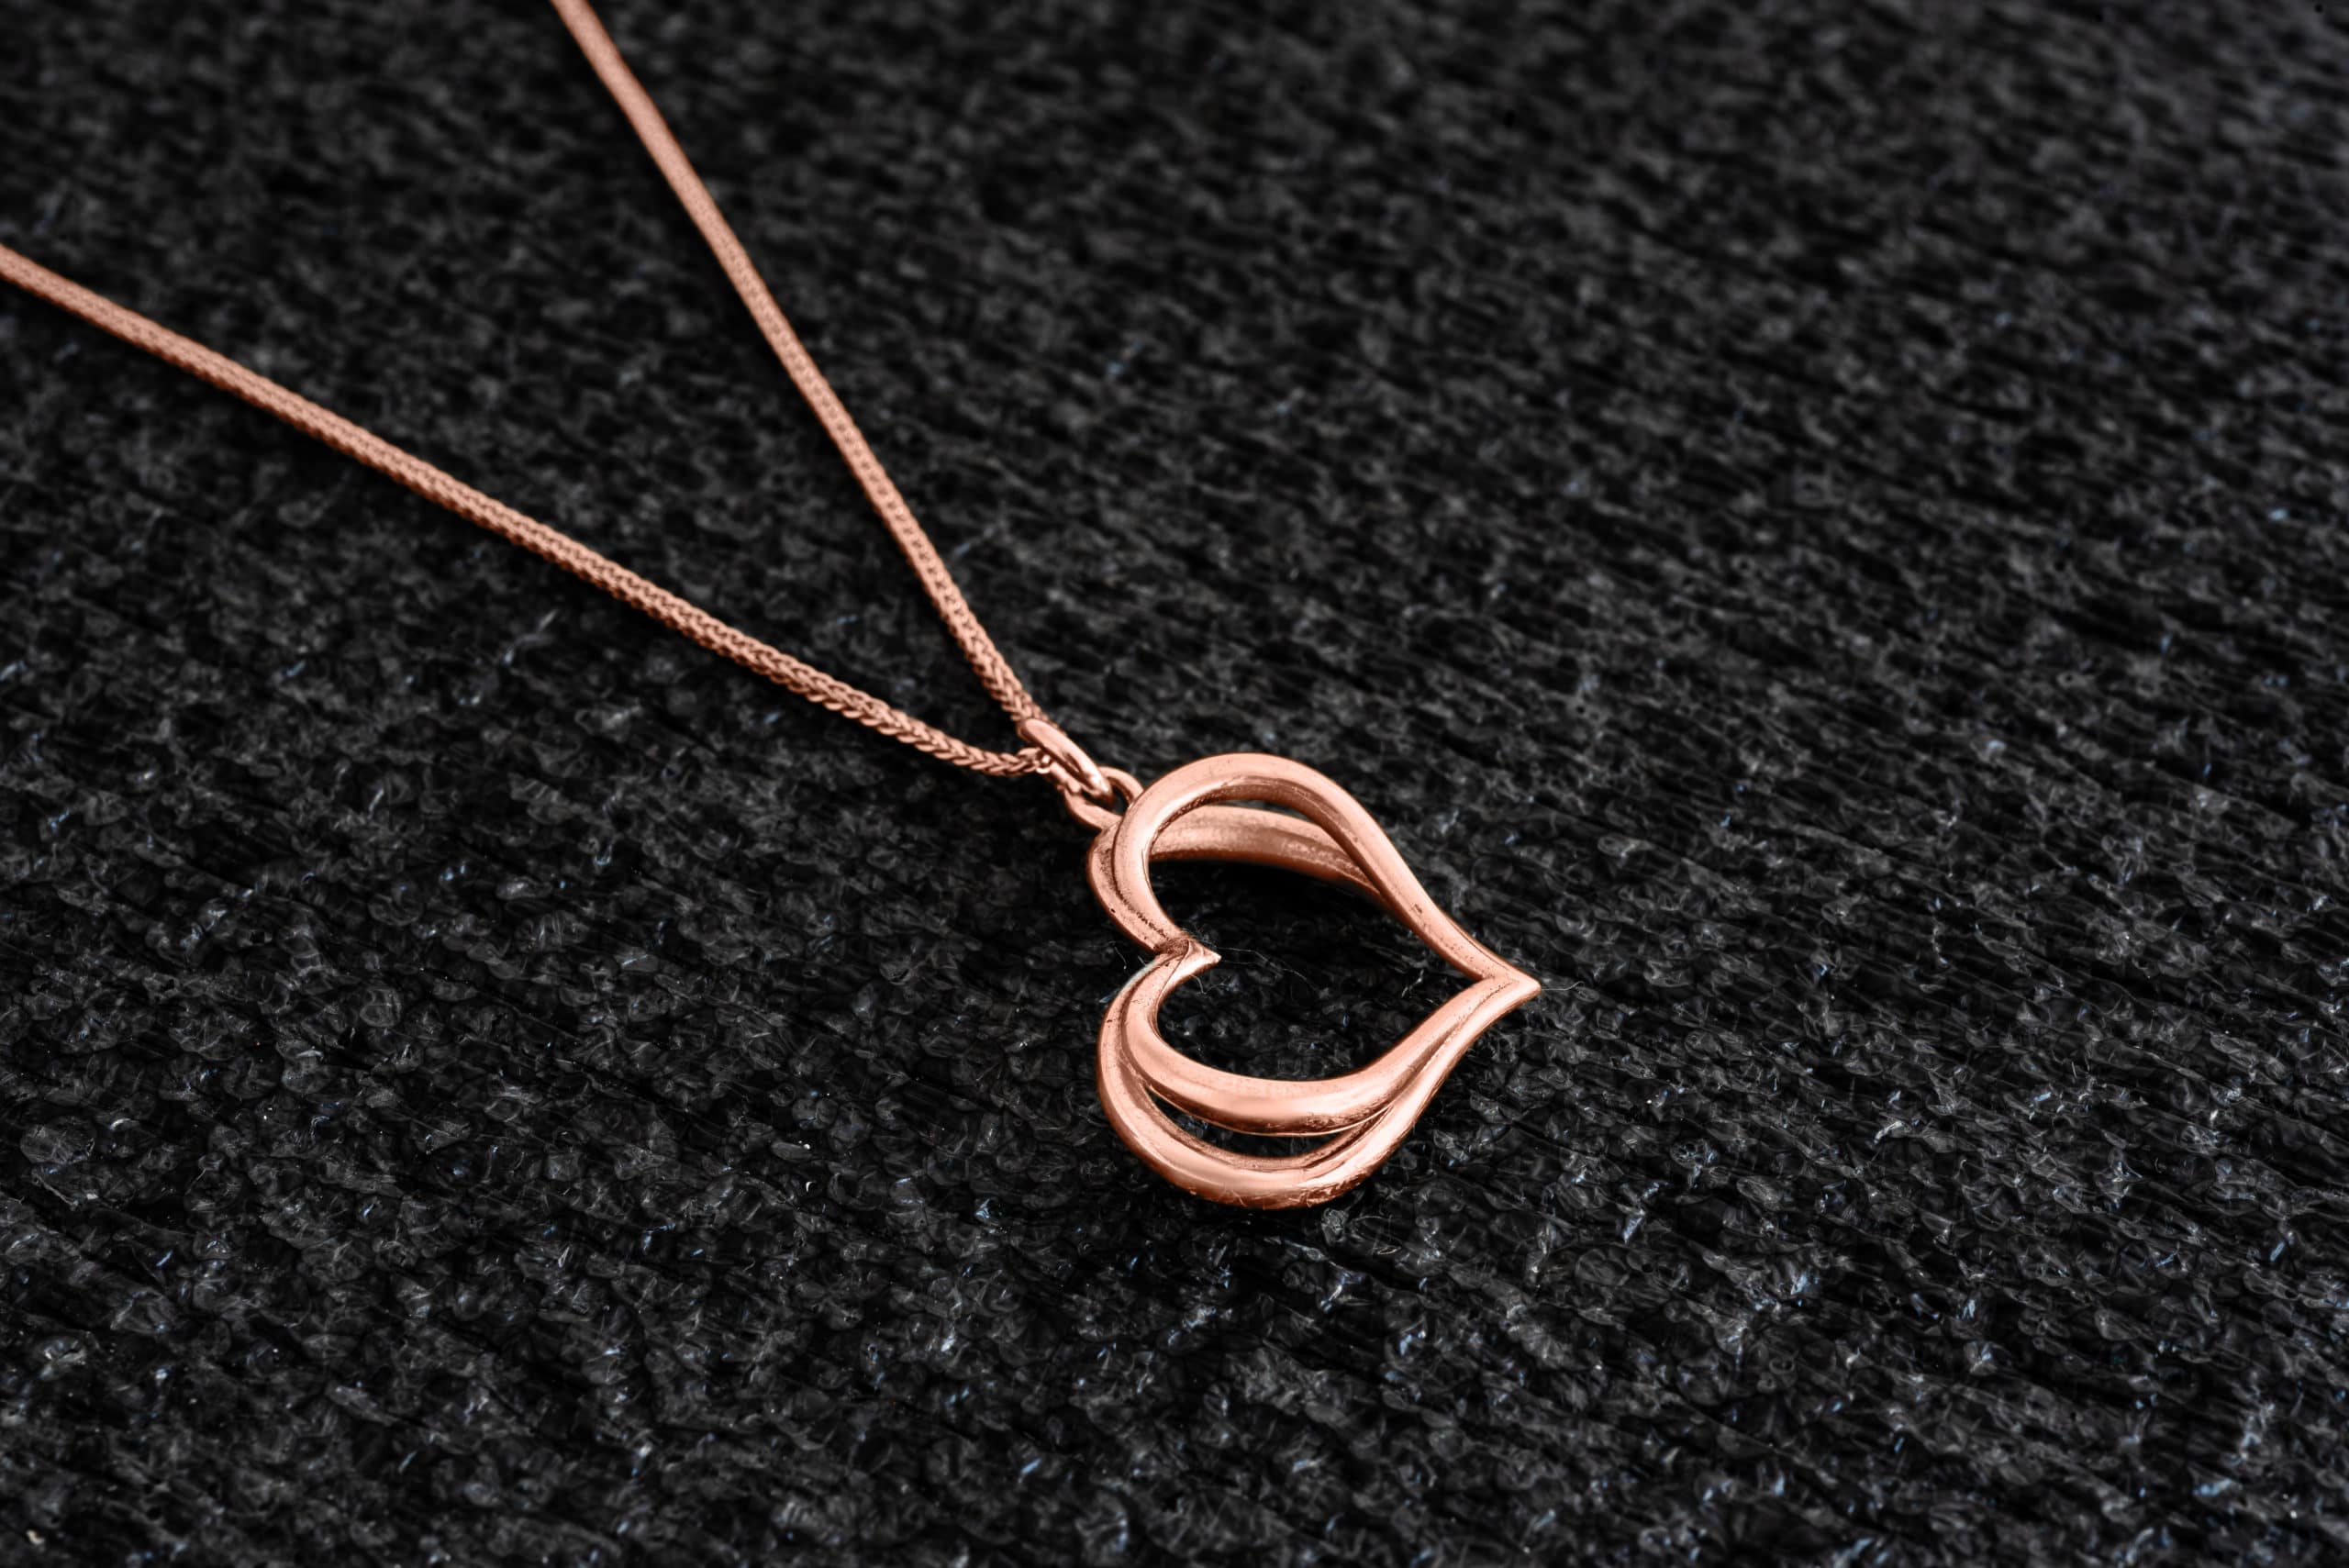 Butterfly Hollow Double Heart 14K Gold Necklace